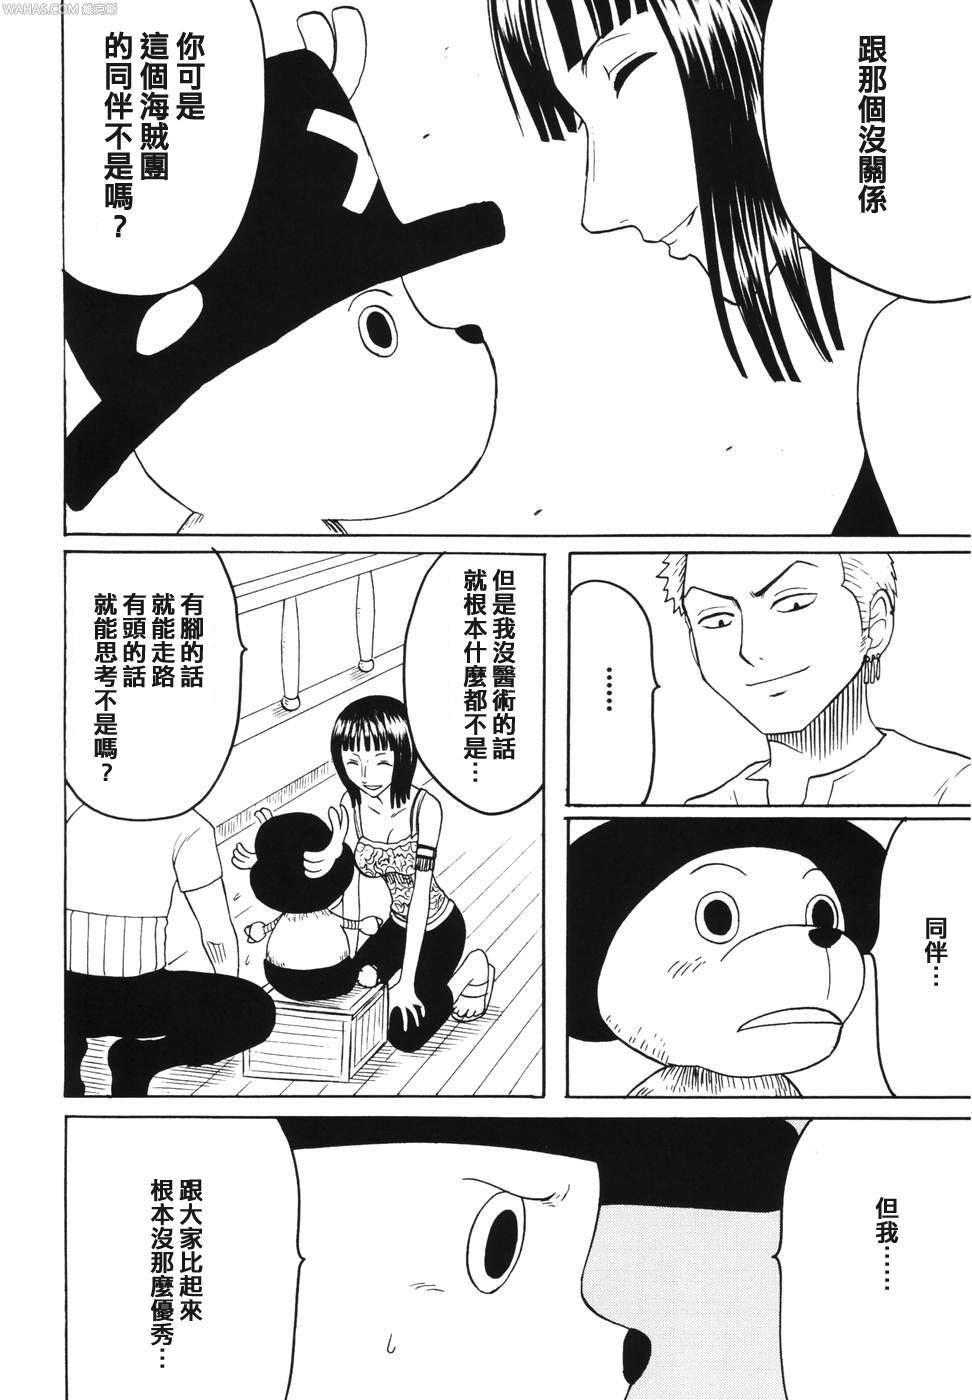 Stepfather Dancing Animation Run - One piece Tight - Page 3